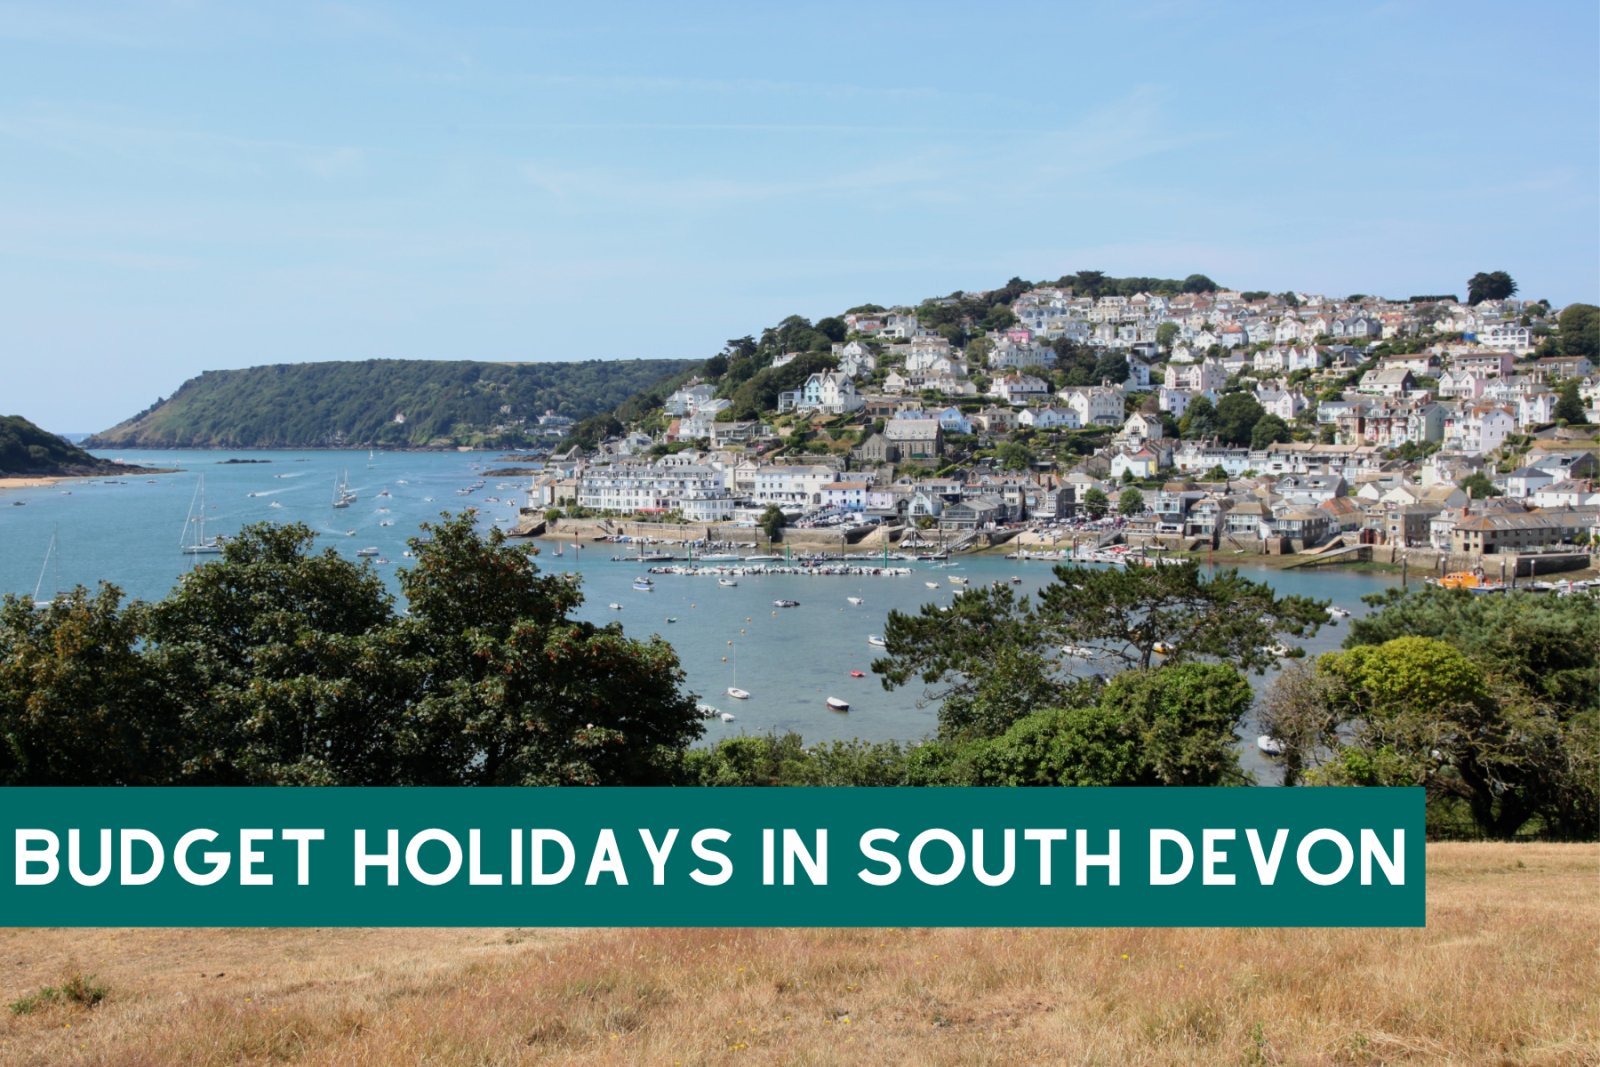 Budget Holiday in South Devon